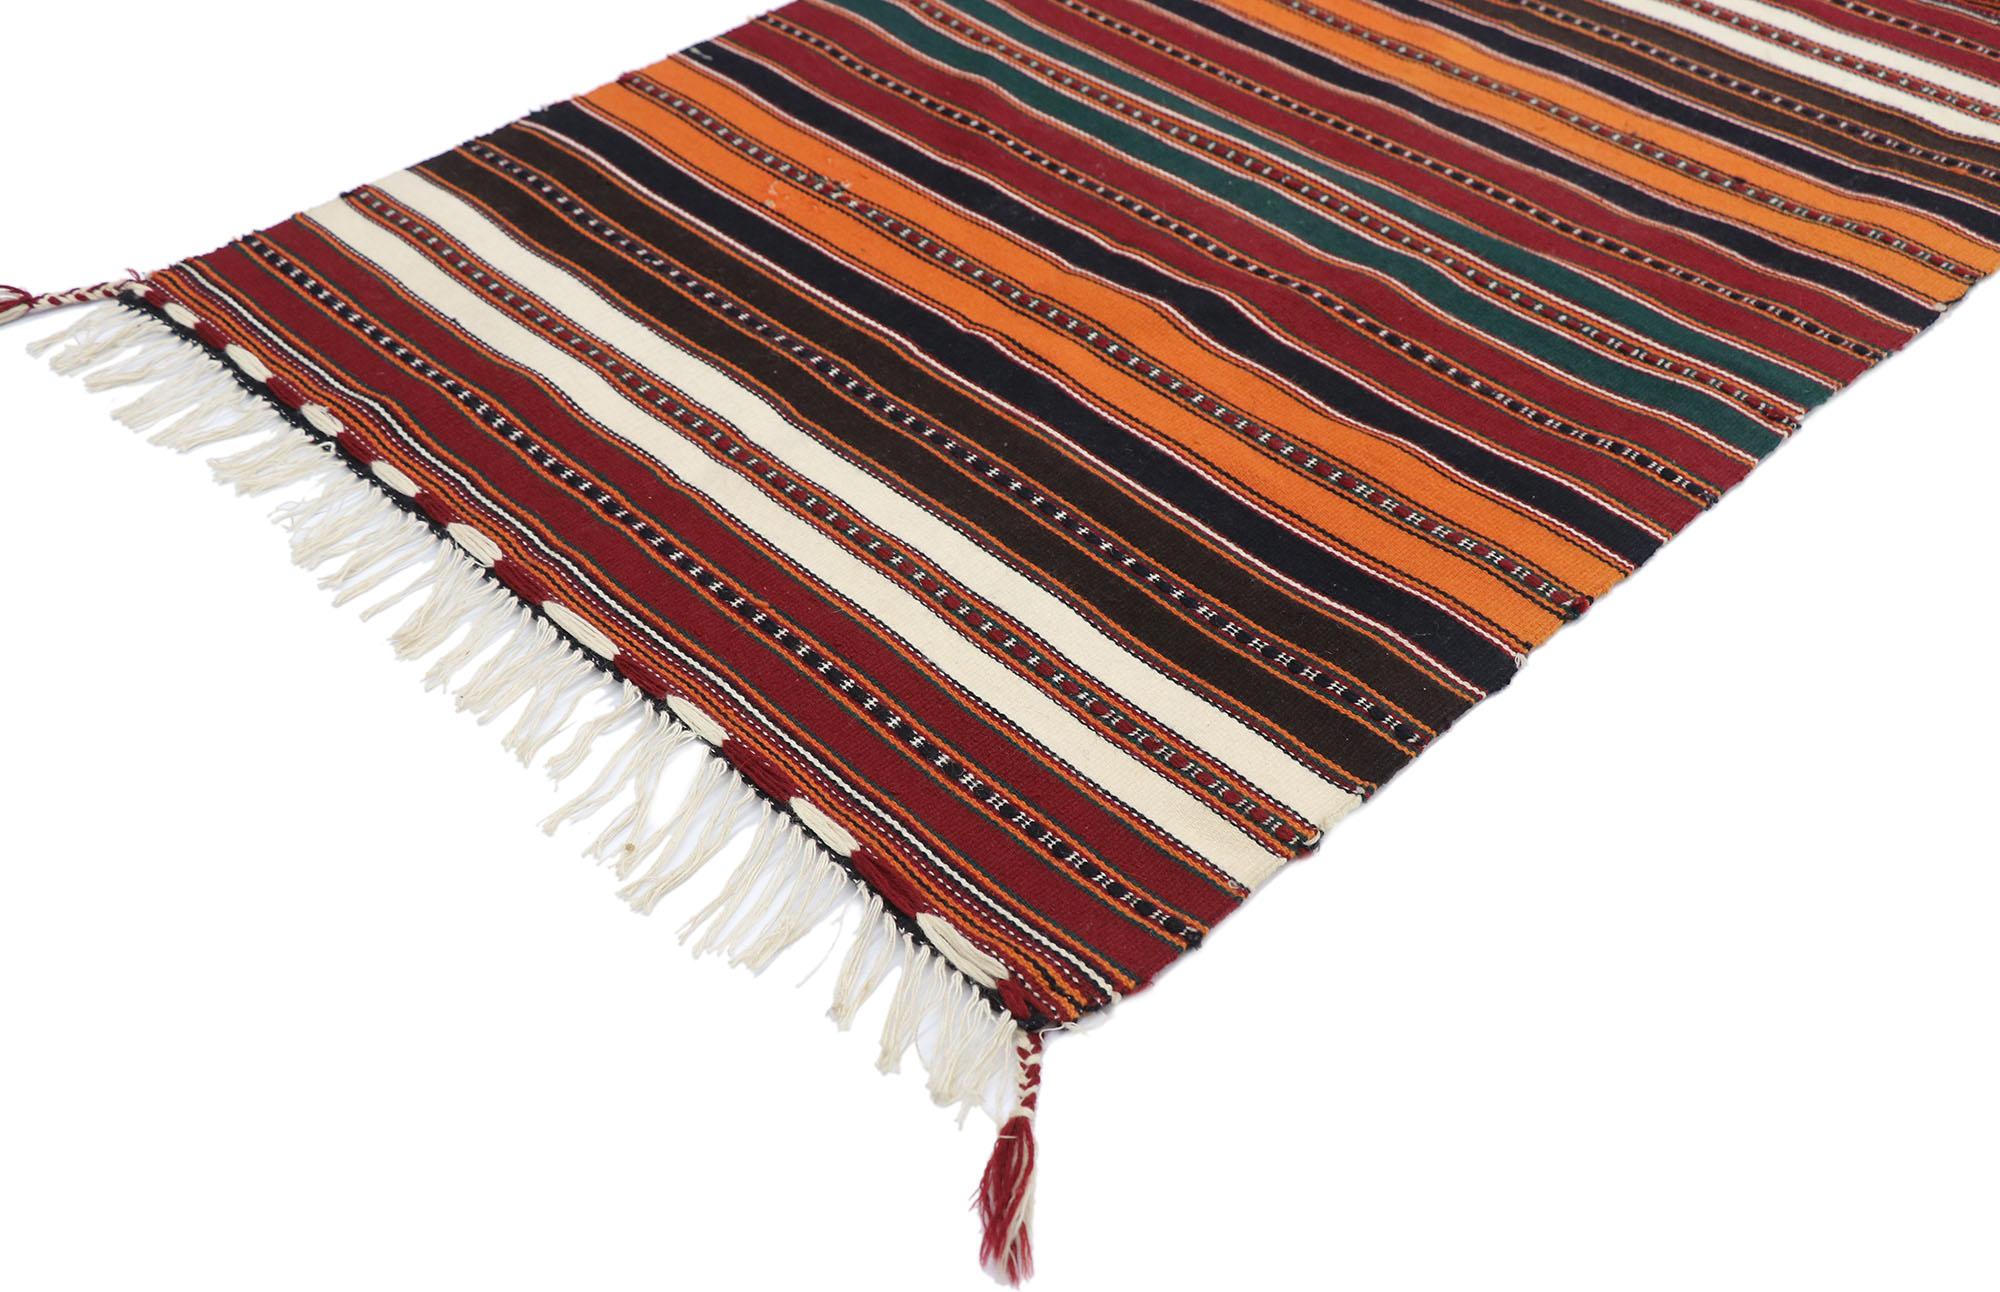 77895, vintage Persian Shiraz Striped Kilim rug. With its warm hues and rugged beauty, this hand-woven wool vintage Persian Shiraz striped kilim rug manages to meld contemporary, modern, and traditional design elements. The flat-weave kilim rug